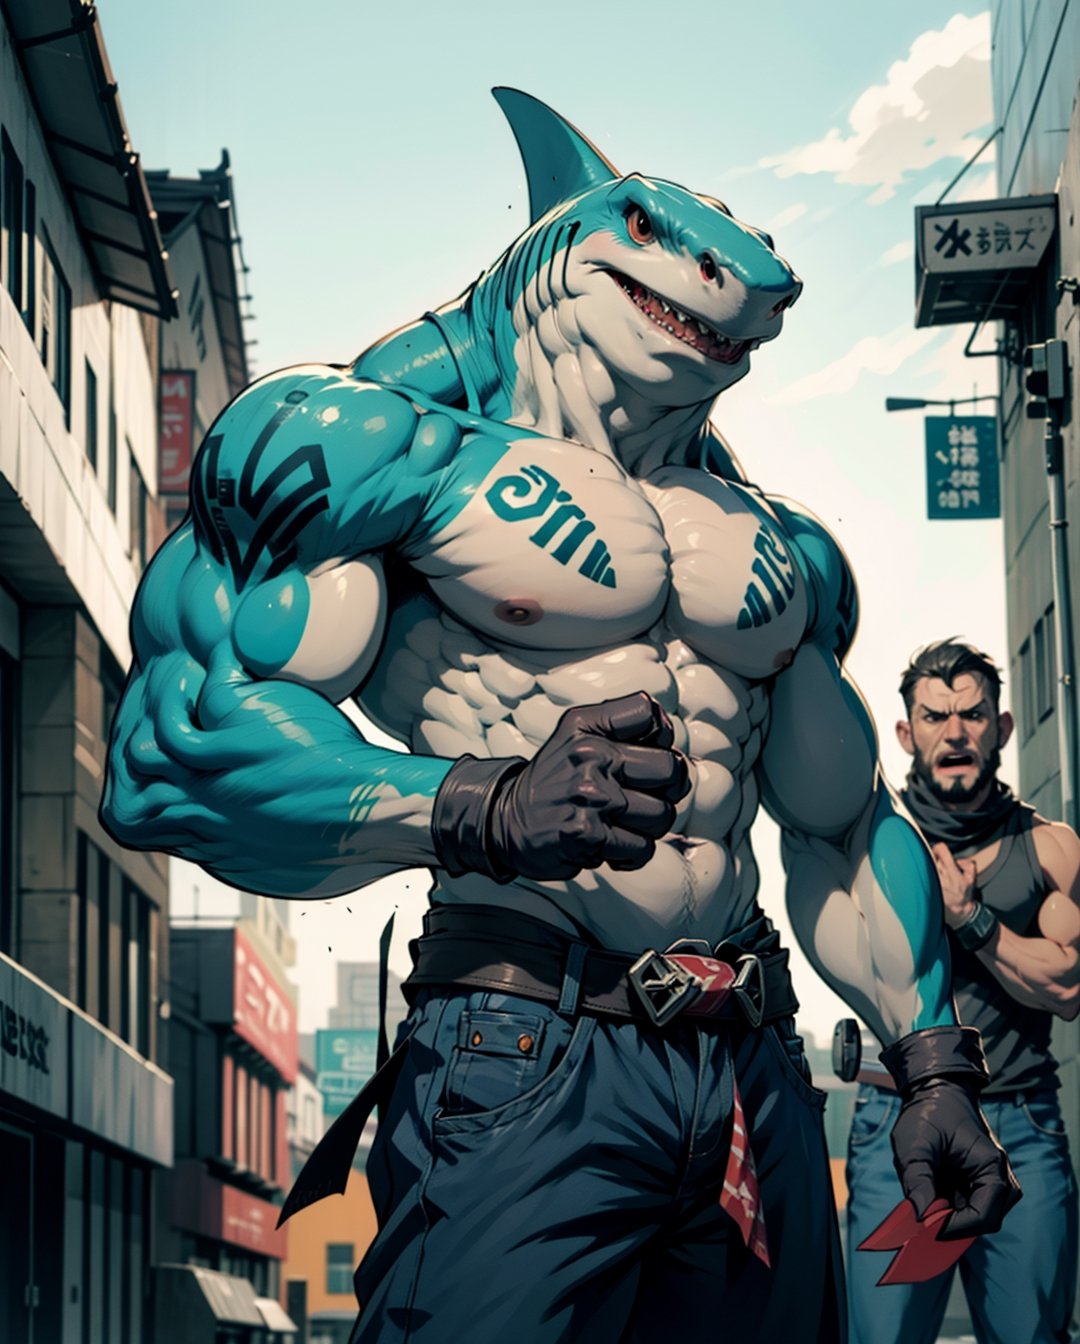 anthropomorphic, street shark, muscular umanoid shark roaring and attacking pocision, king_shark,
aggressive expression, tattoos on arms, angry, short gloves and claws on fingers